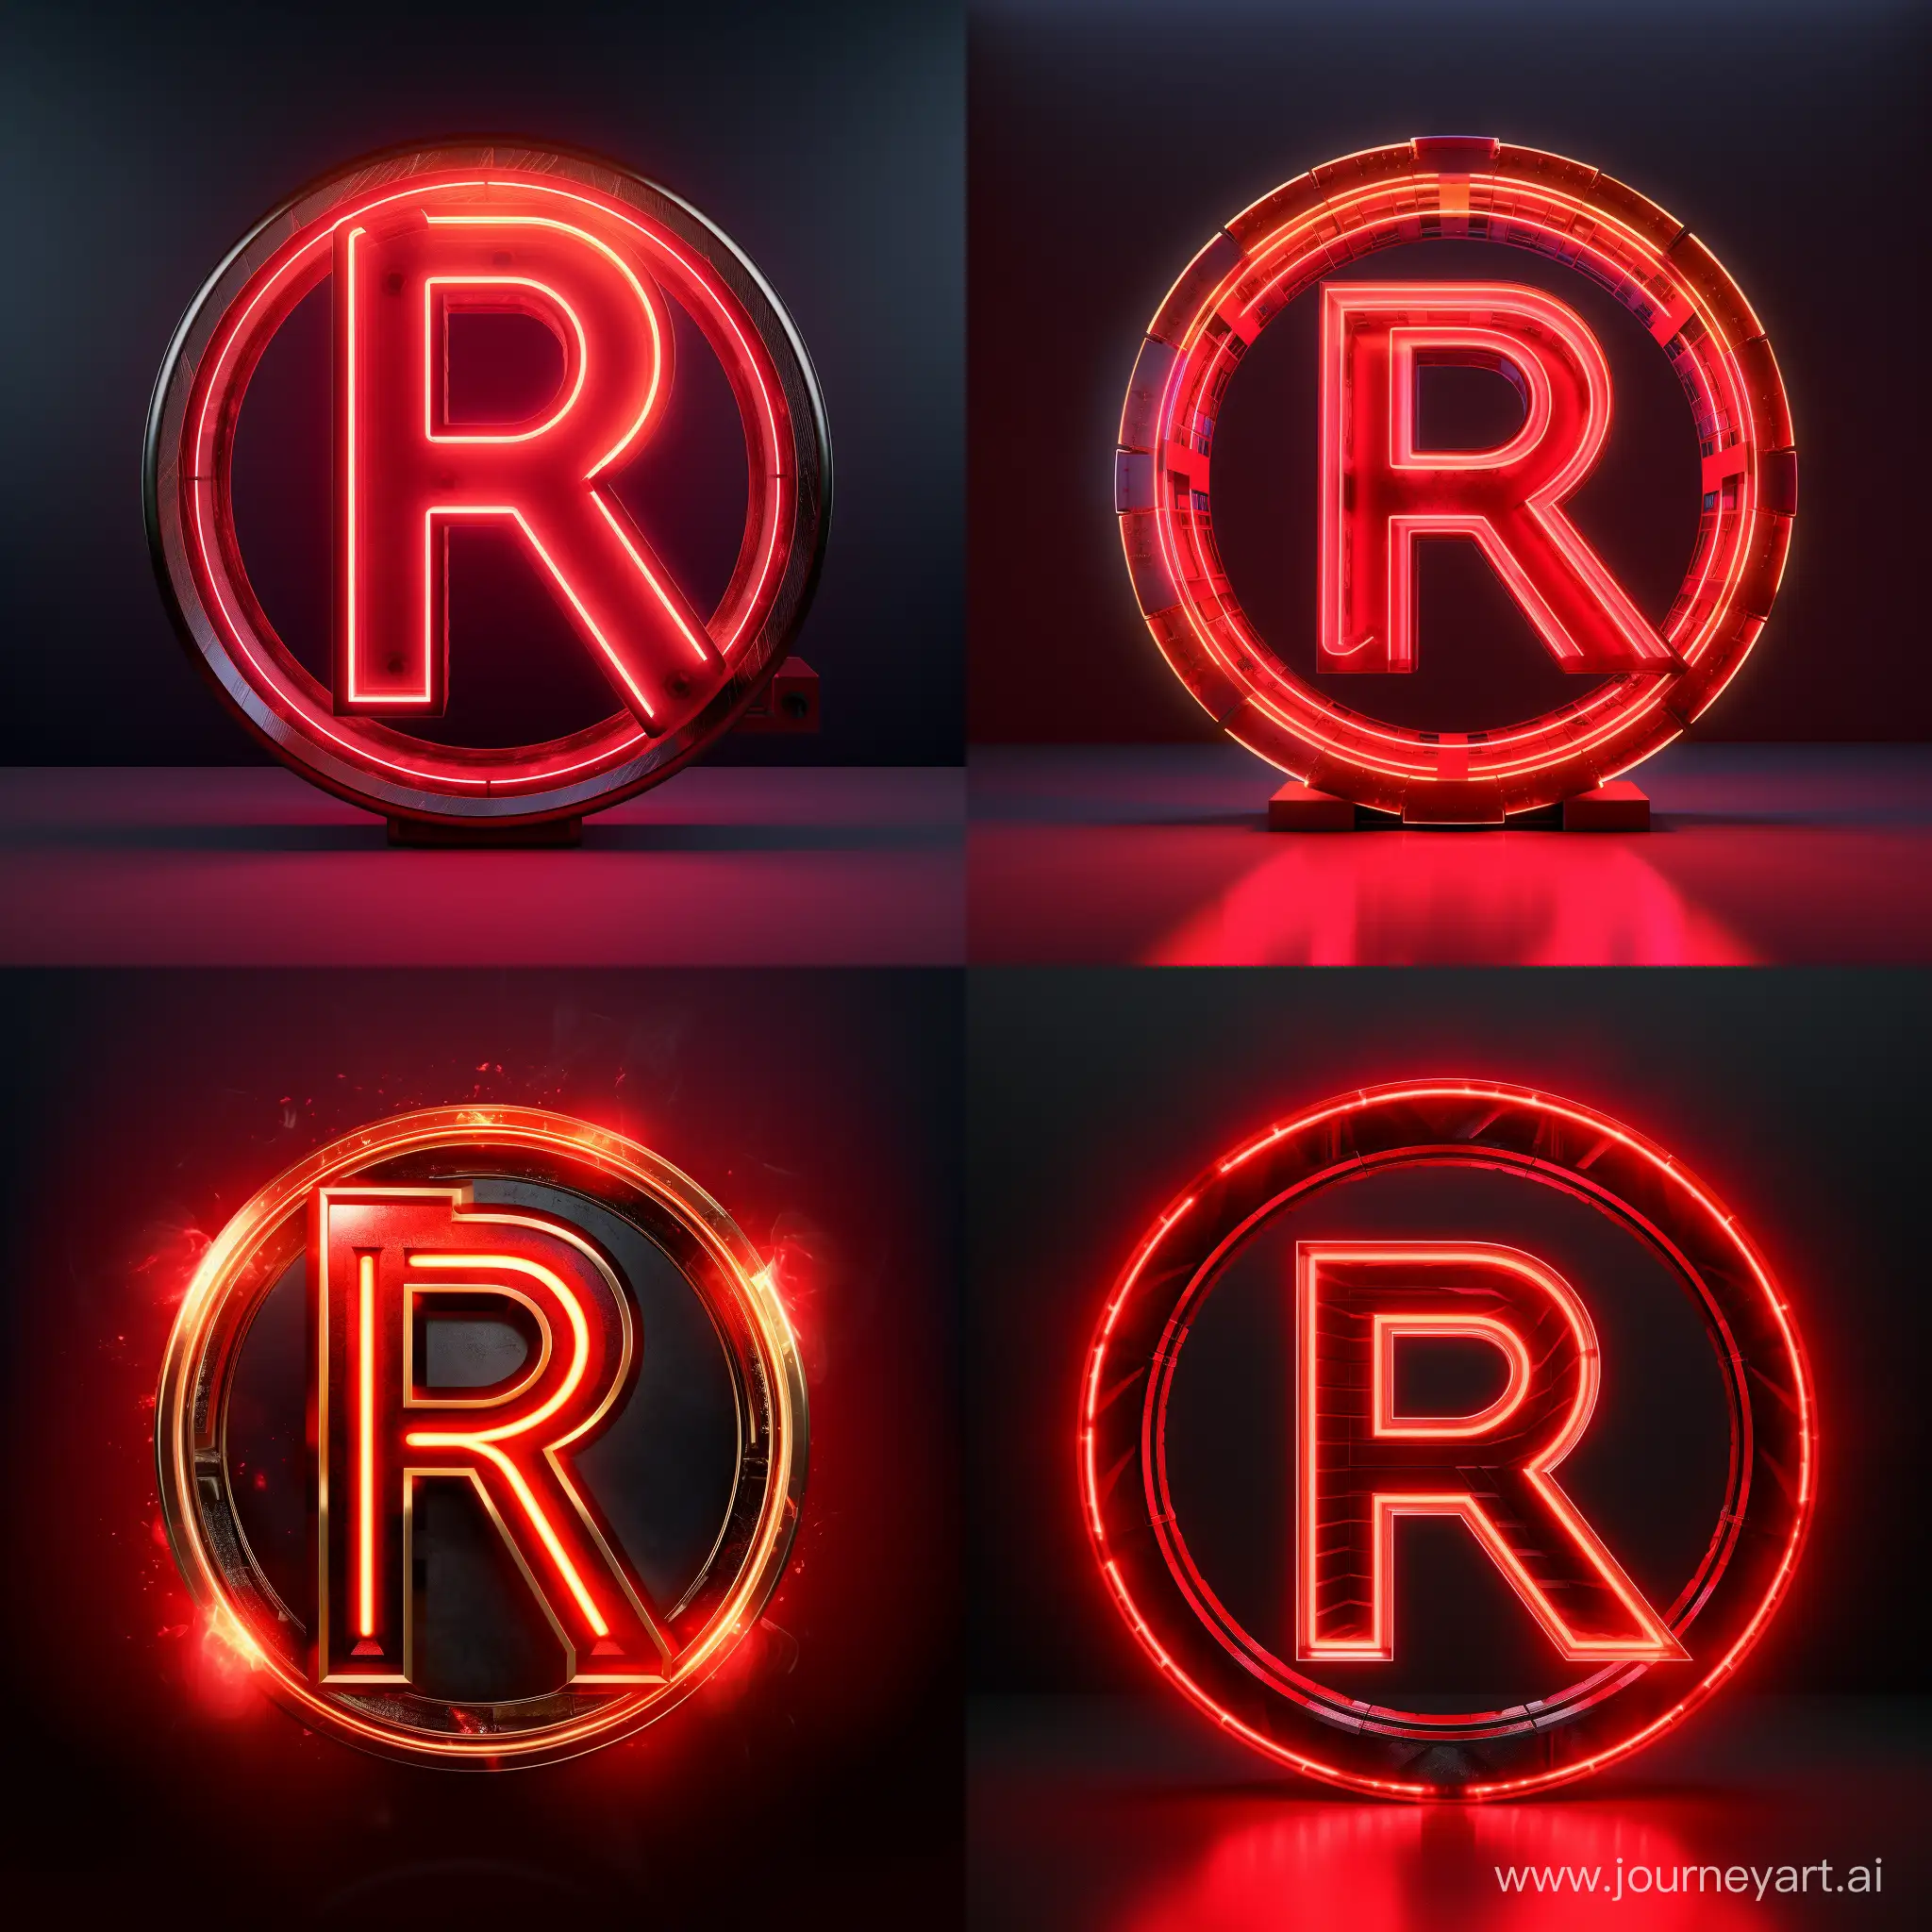 Vibrant-Red-Roblox-Logo-Illuminated-in-Neon-Round-Frame-for-YouTube-Channel